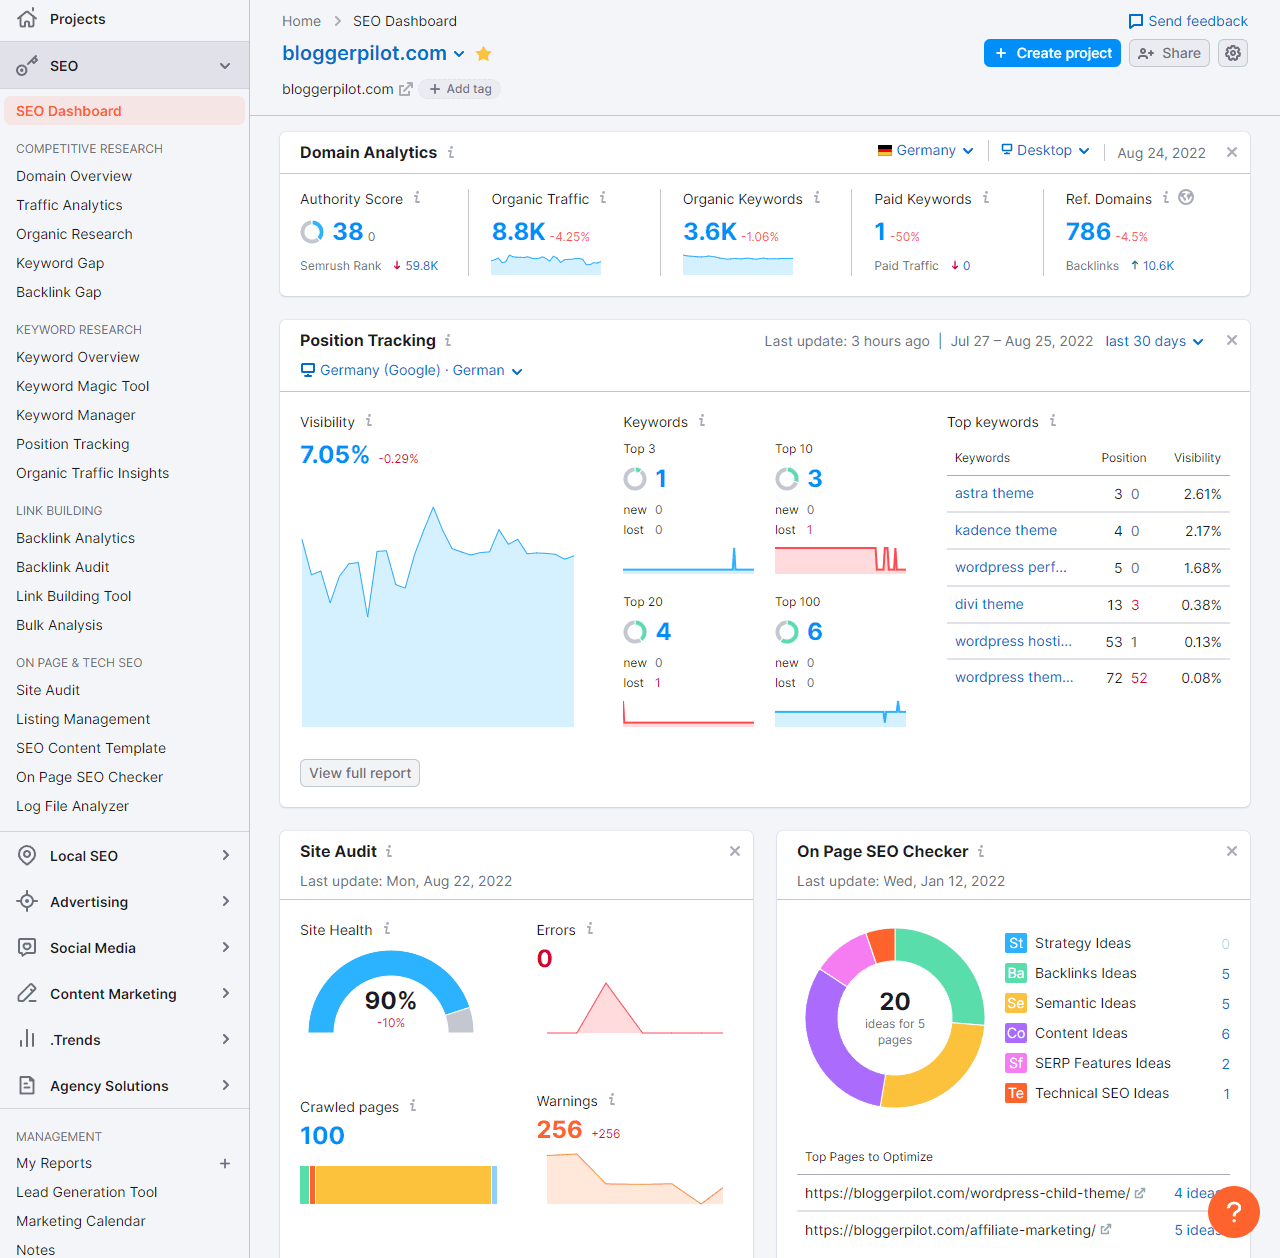 The SEO Dashboard with the most important data about the project.